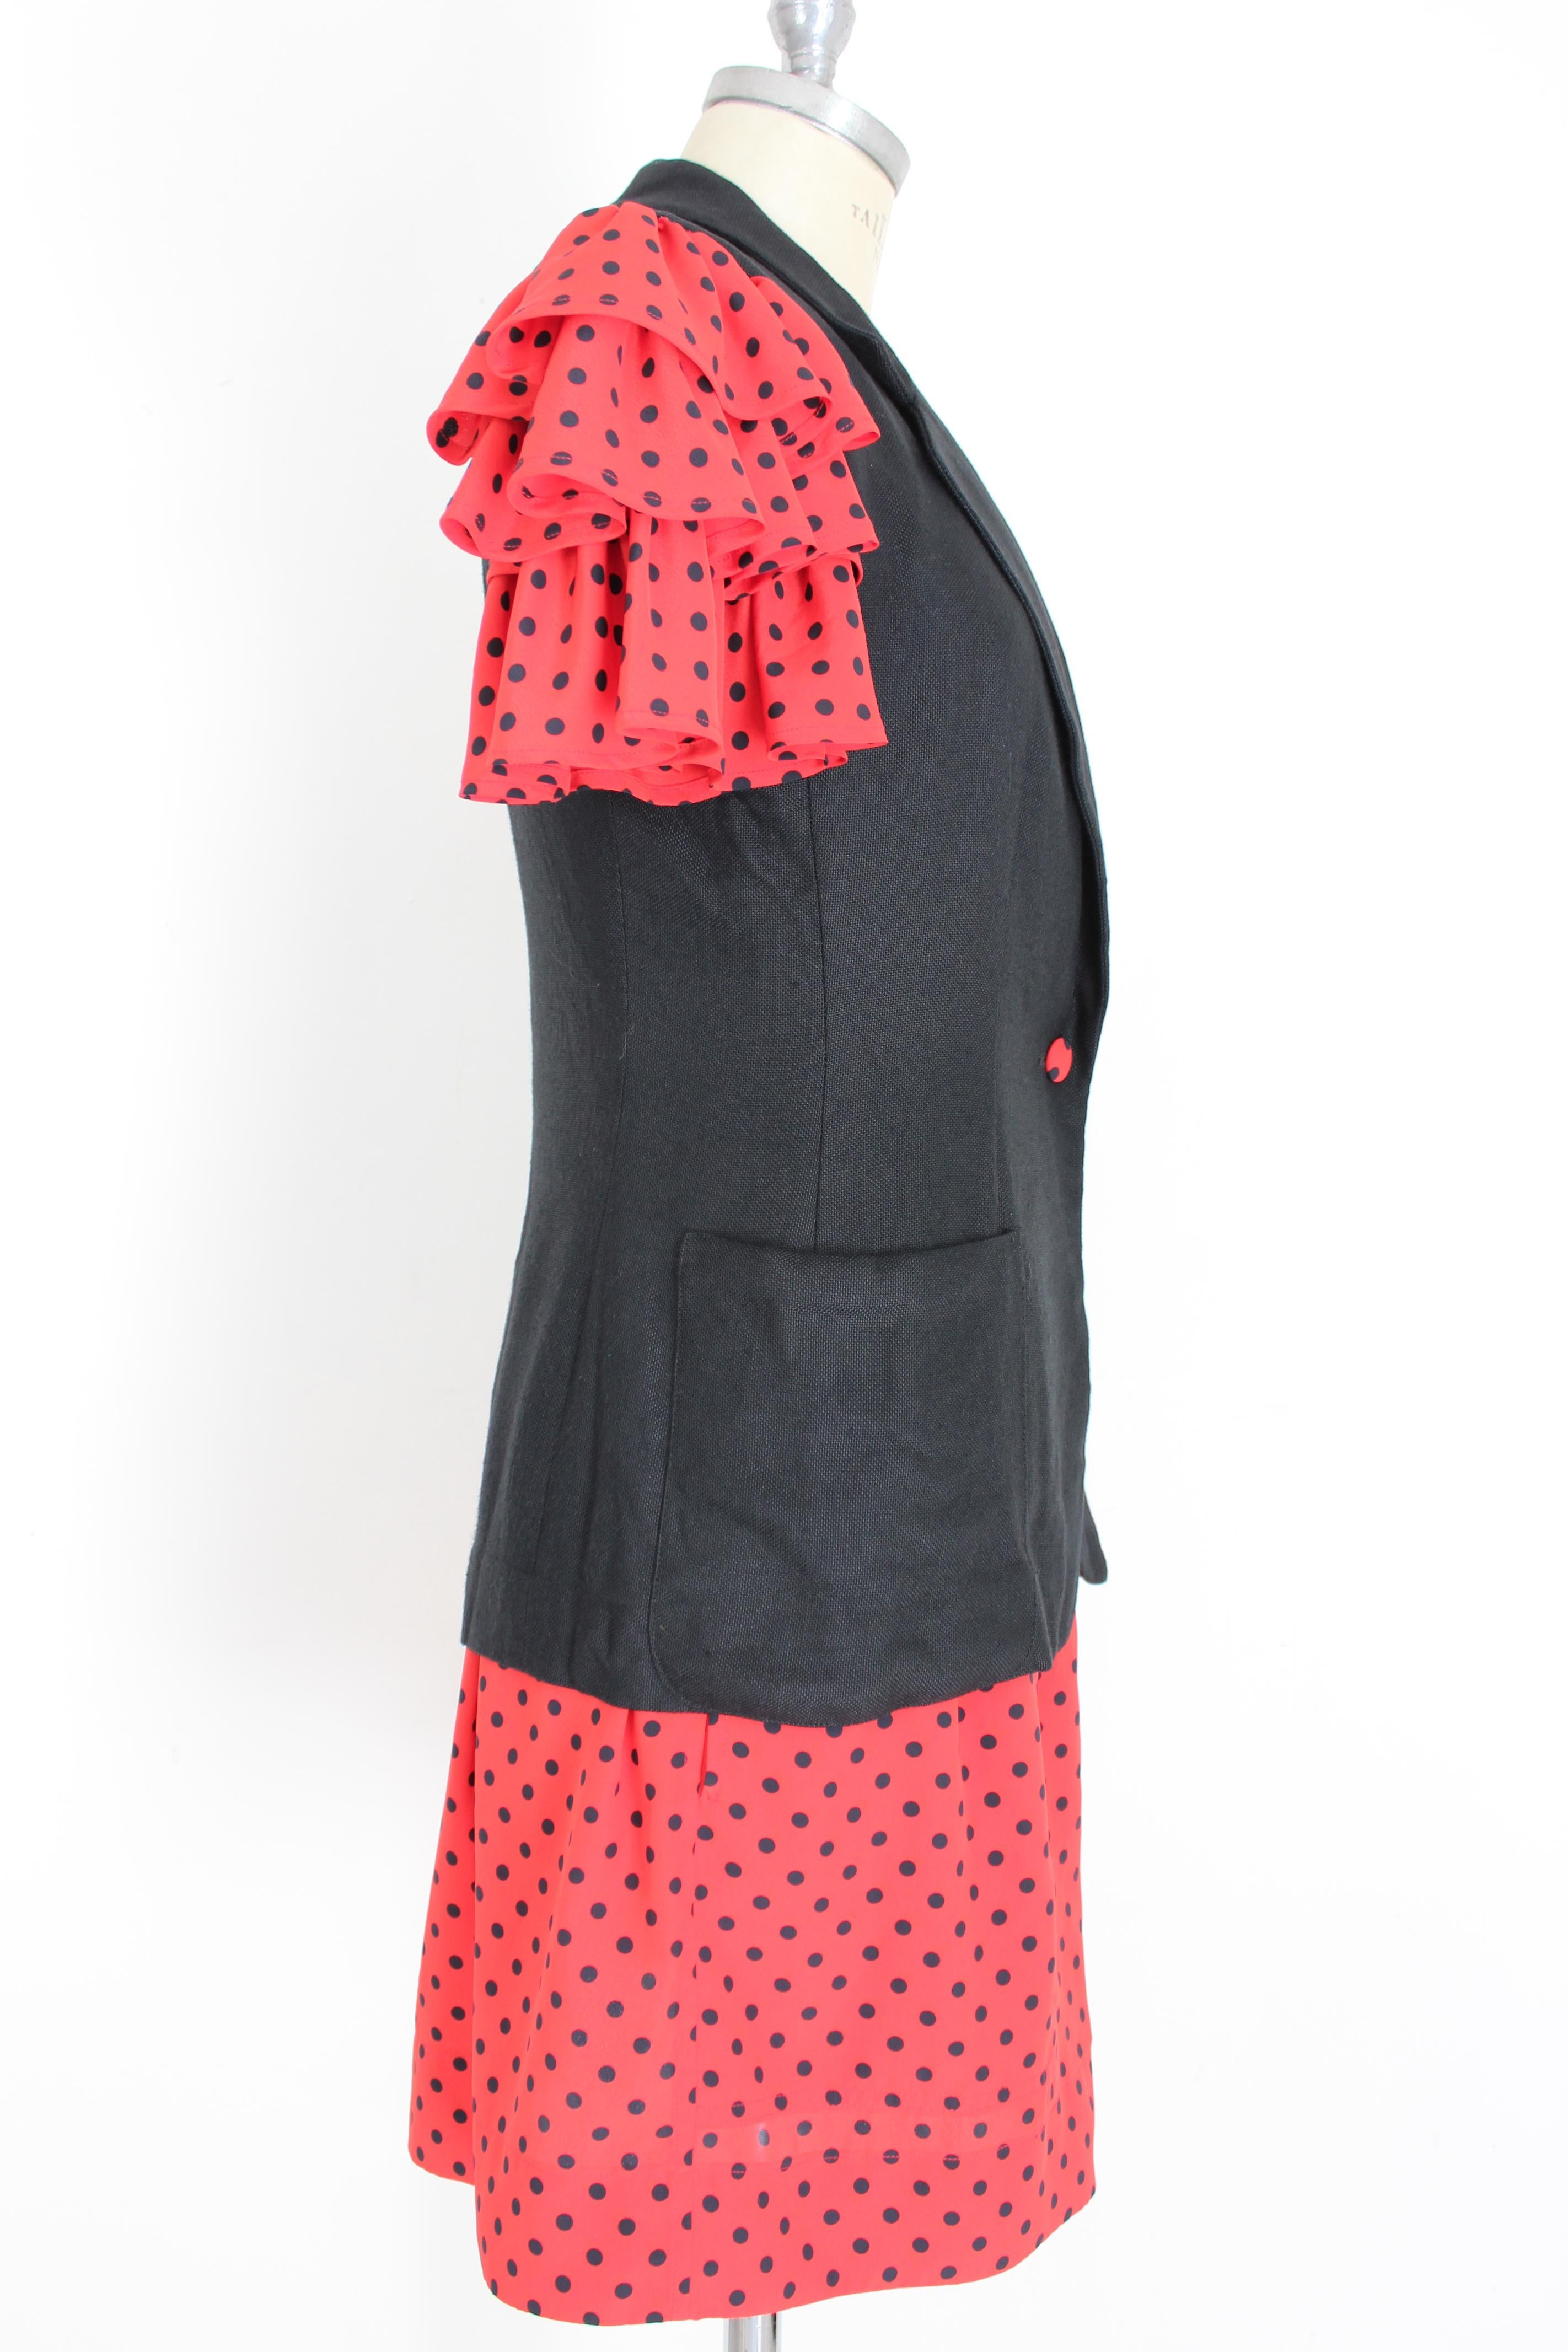 Moschino Red Black Polka Dot Cocktail Jacket and Dress Set 1990s Vintage In Excellent Condition In Brindisi, Bt